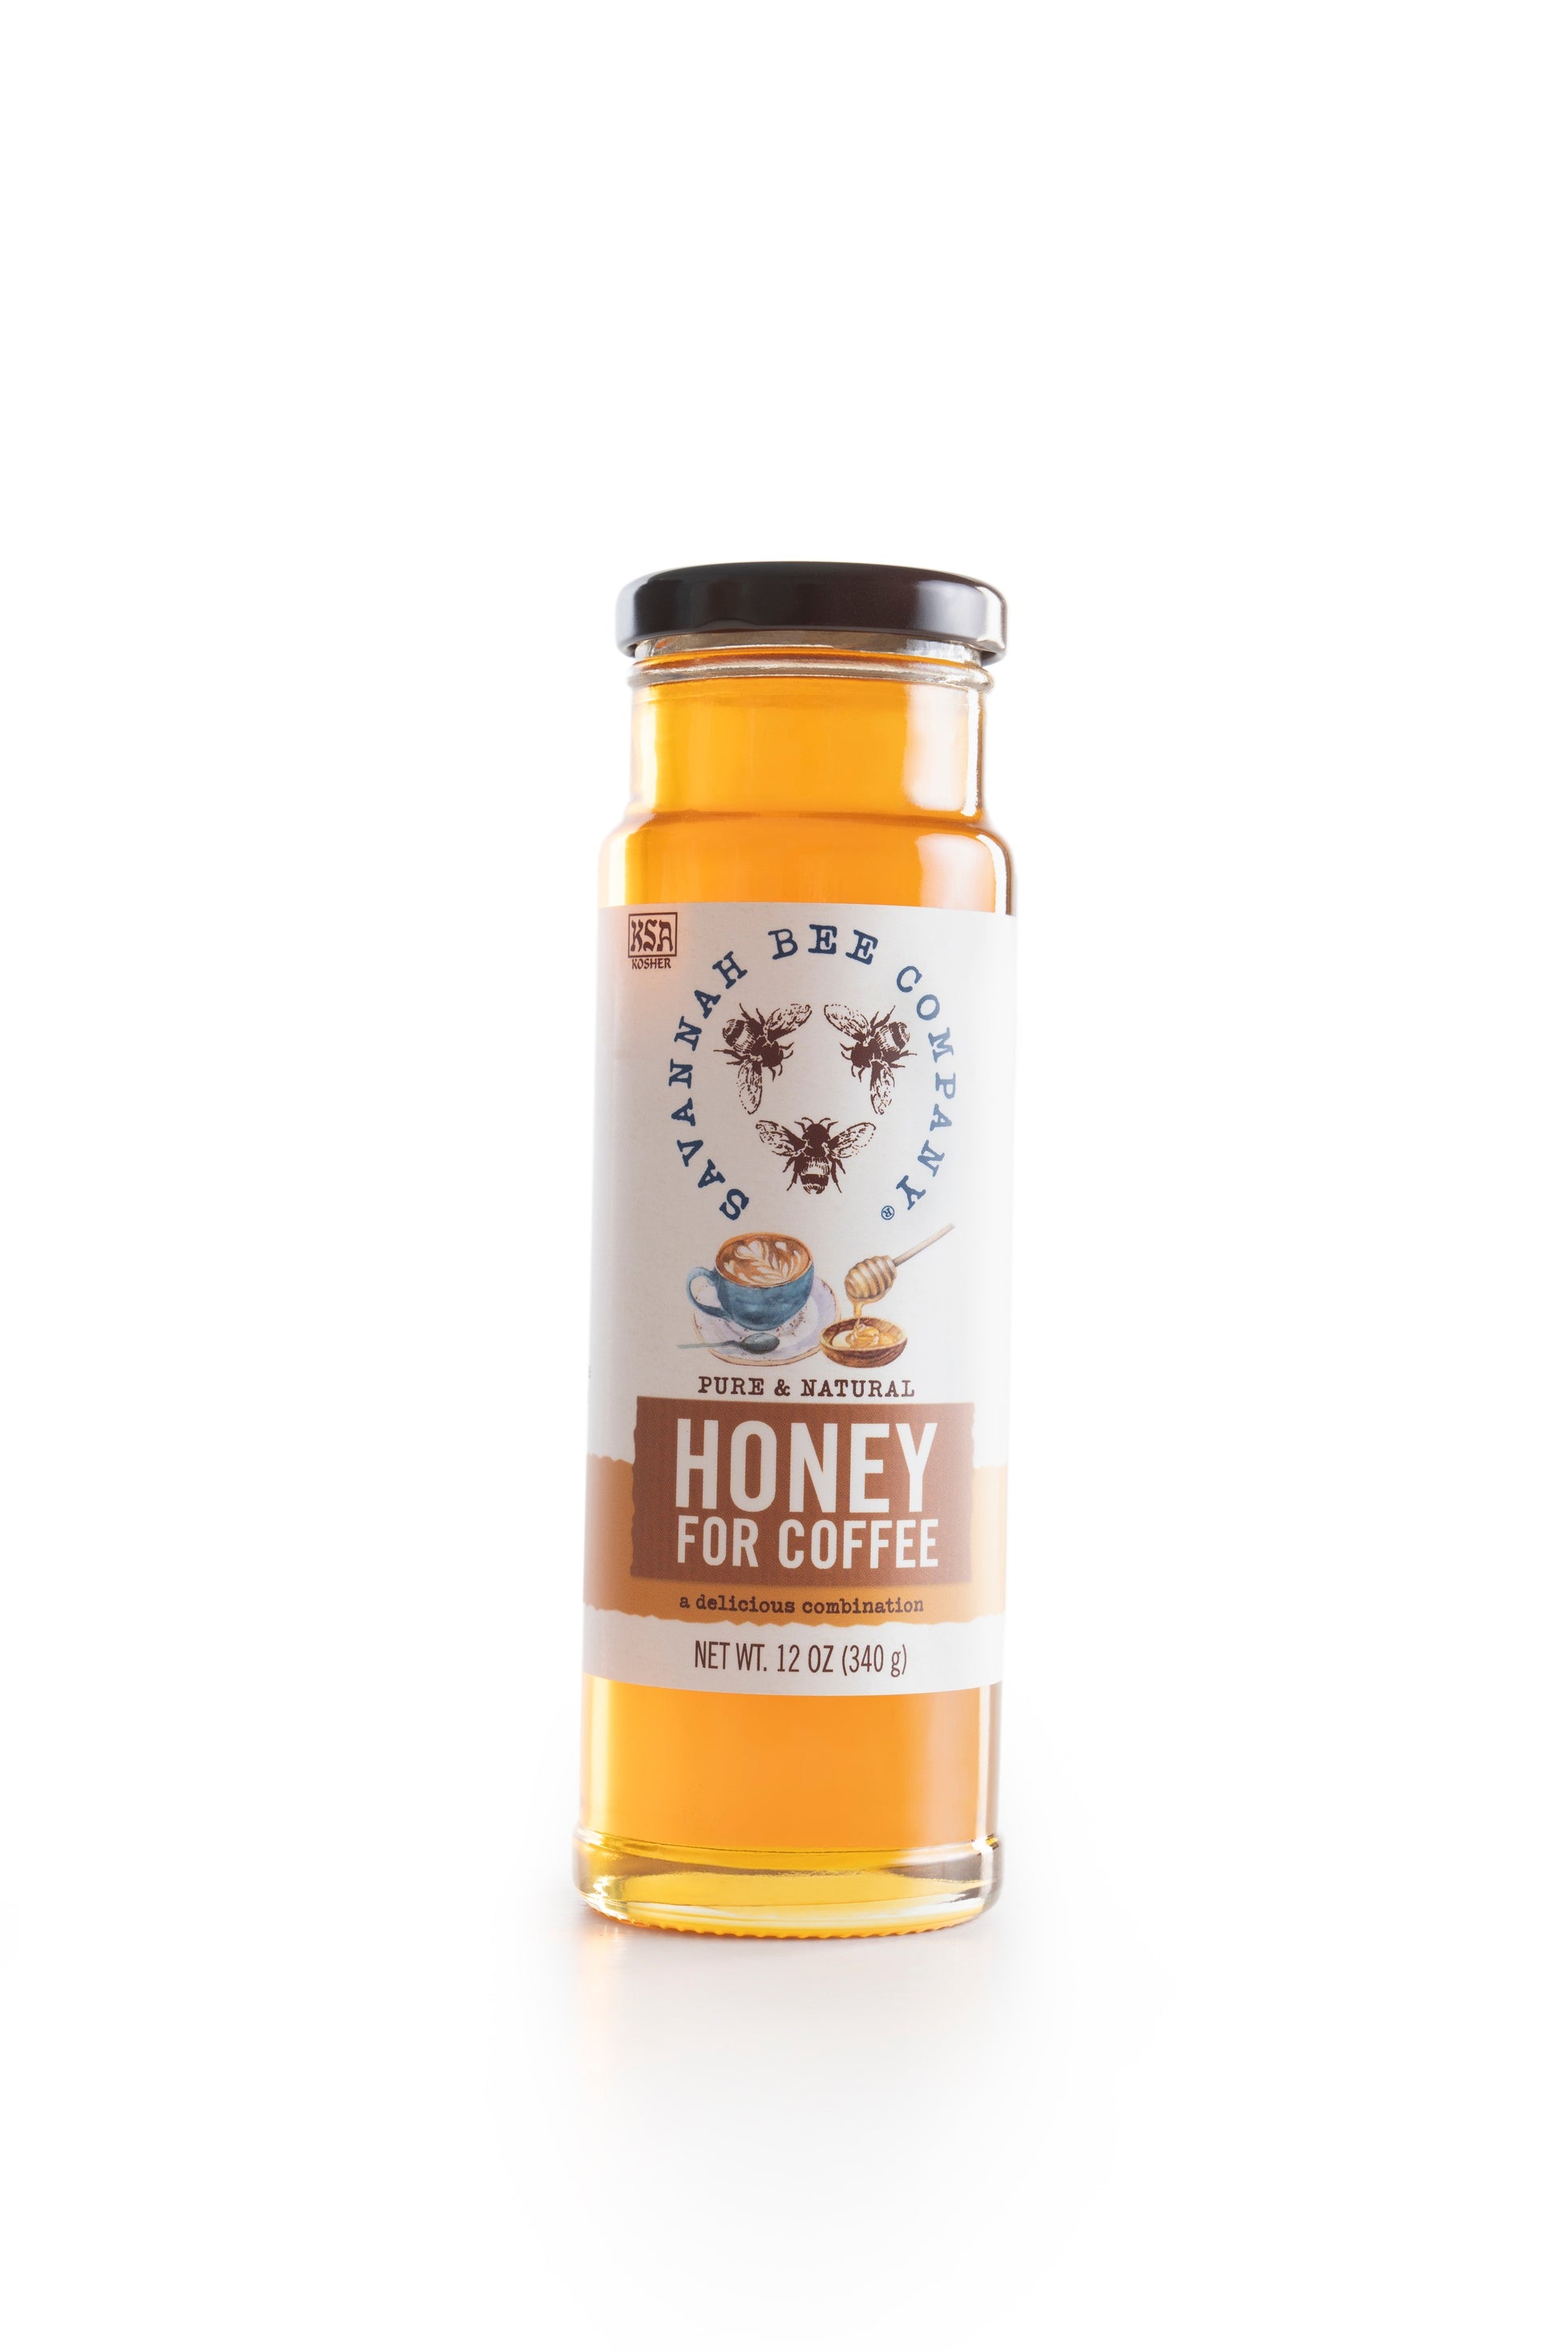 12 oz Honey for coffee in a glass jar front view on a white background